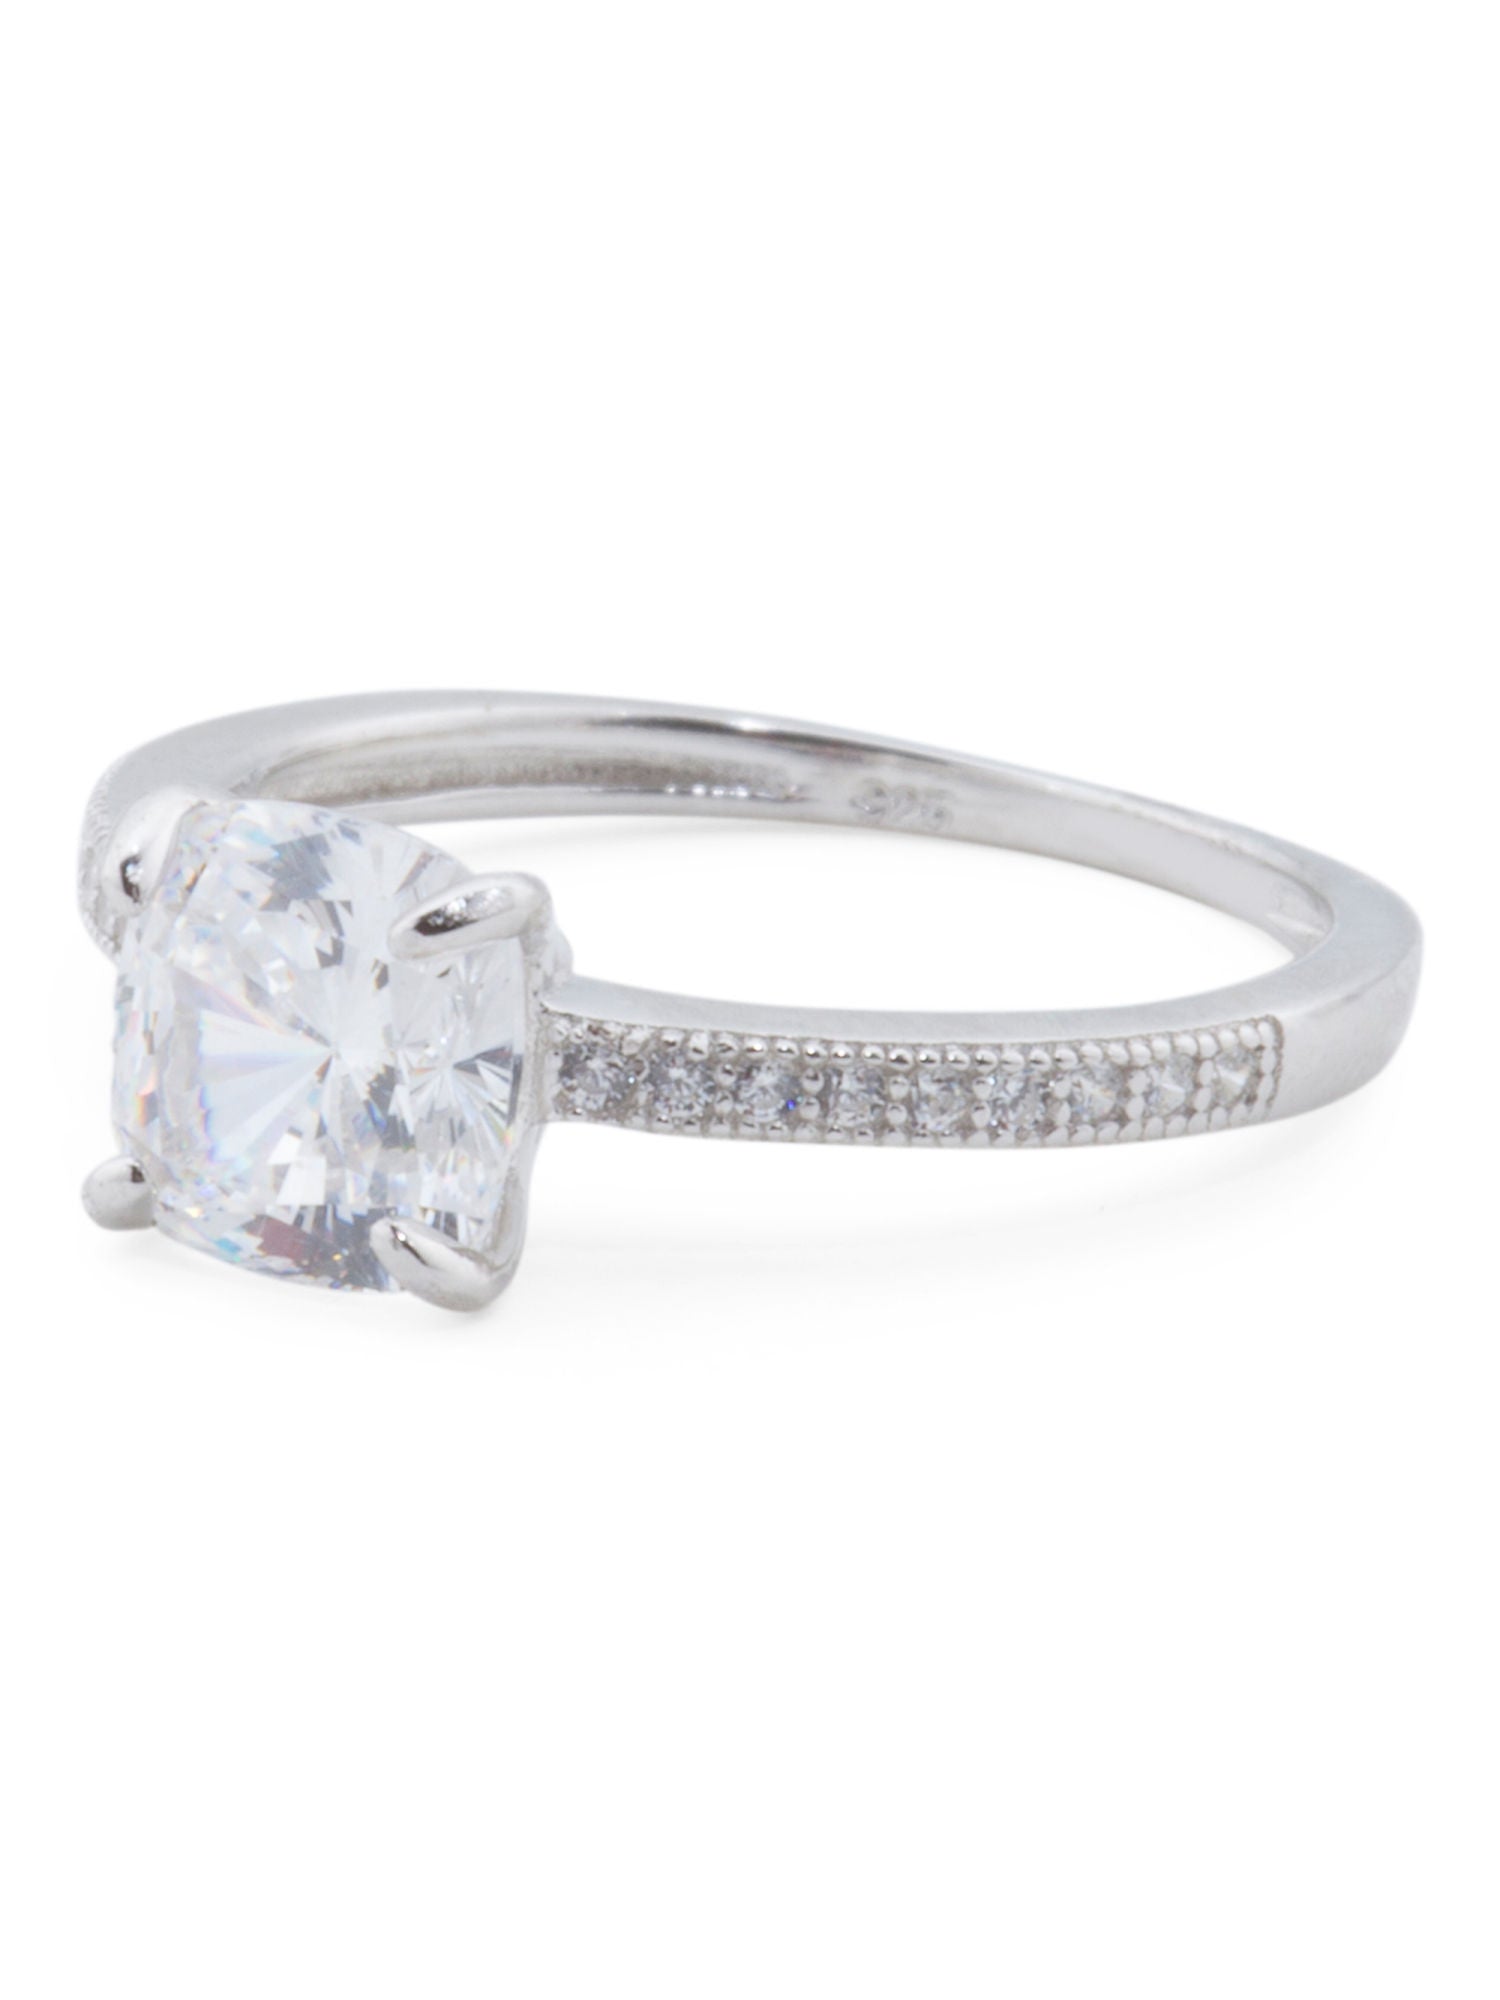 Cubic Zirconia Engagement Ring - Silver 8